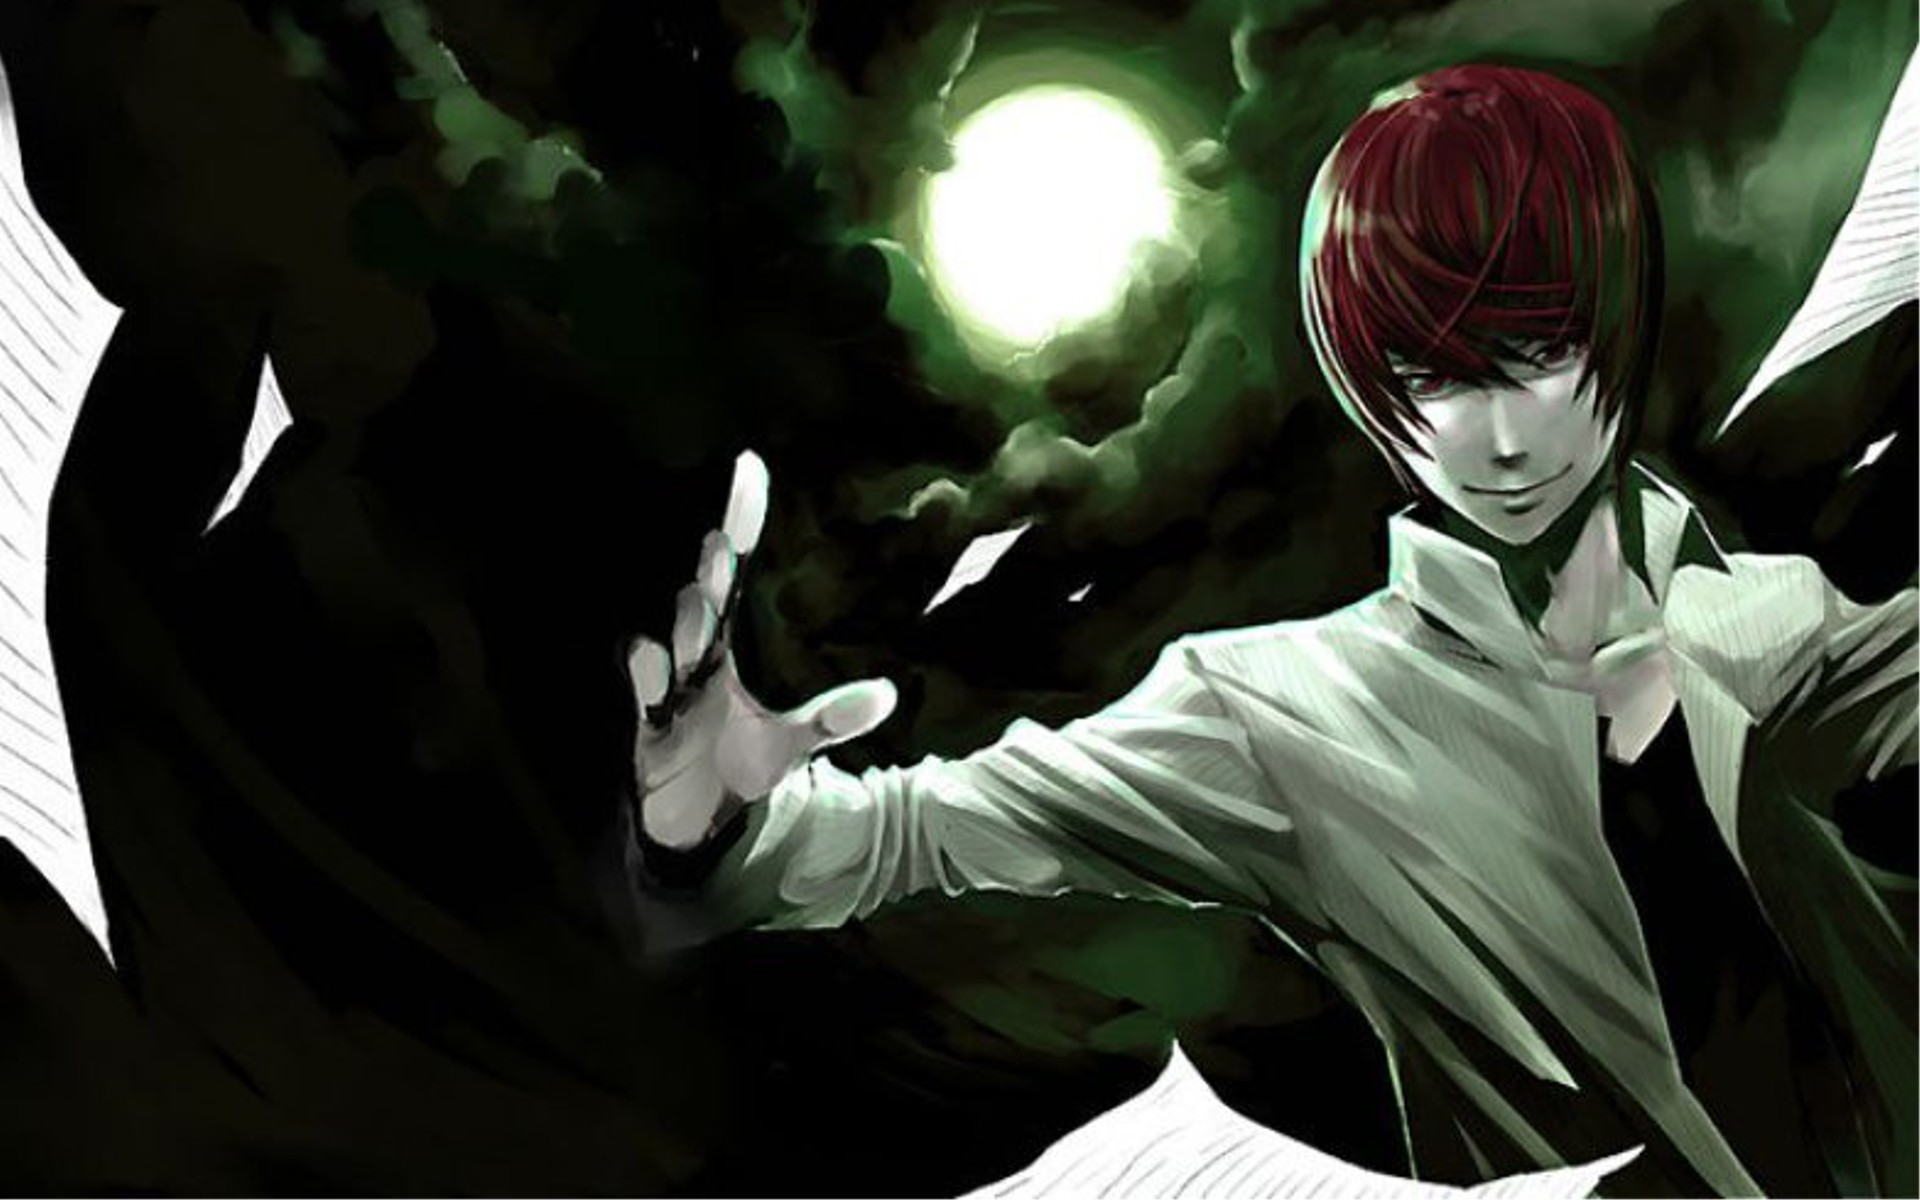 Death Note Wallpaper Hd Collection (32+)